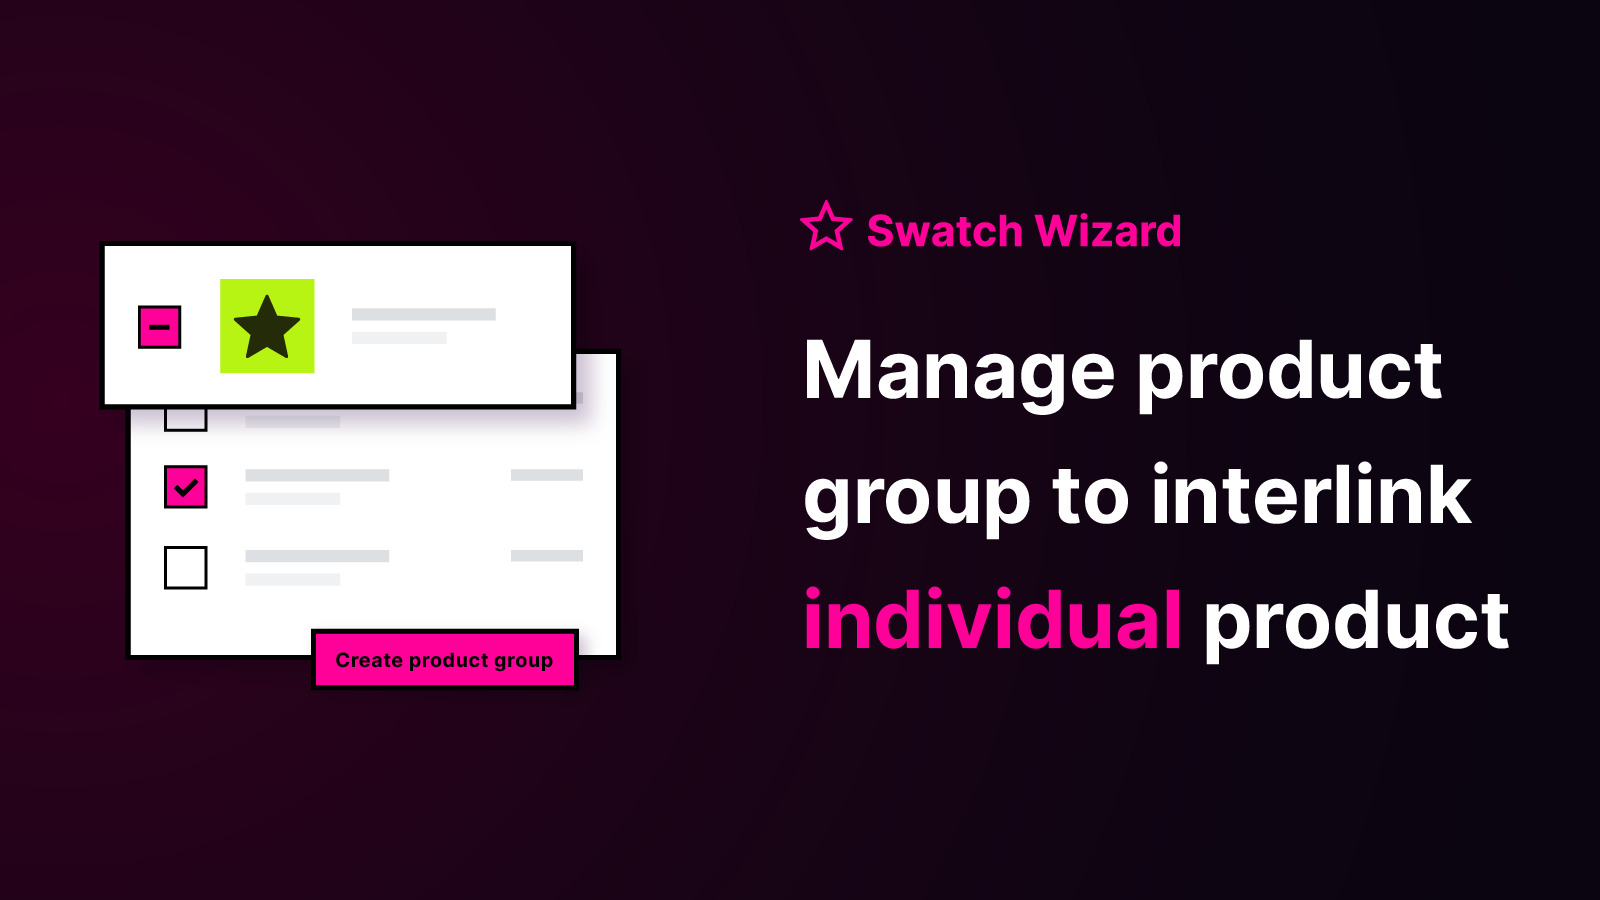 Manage product group to interlink individual products